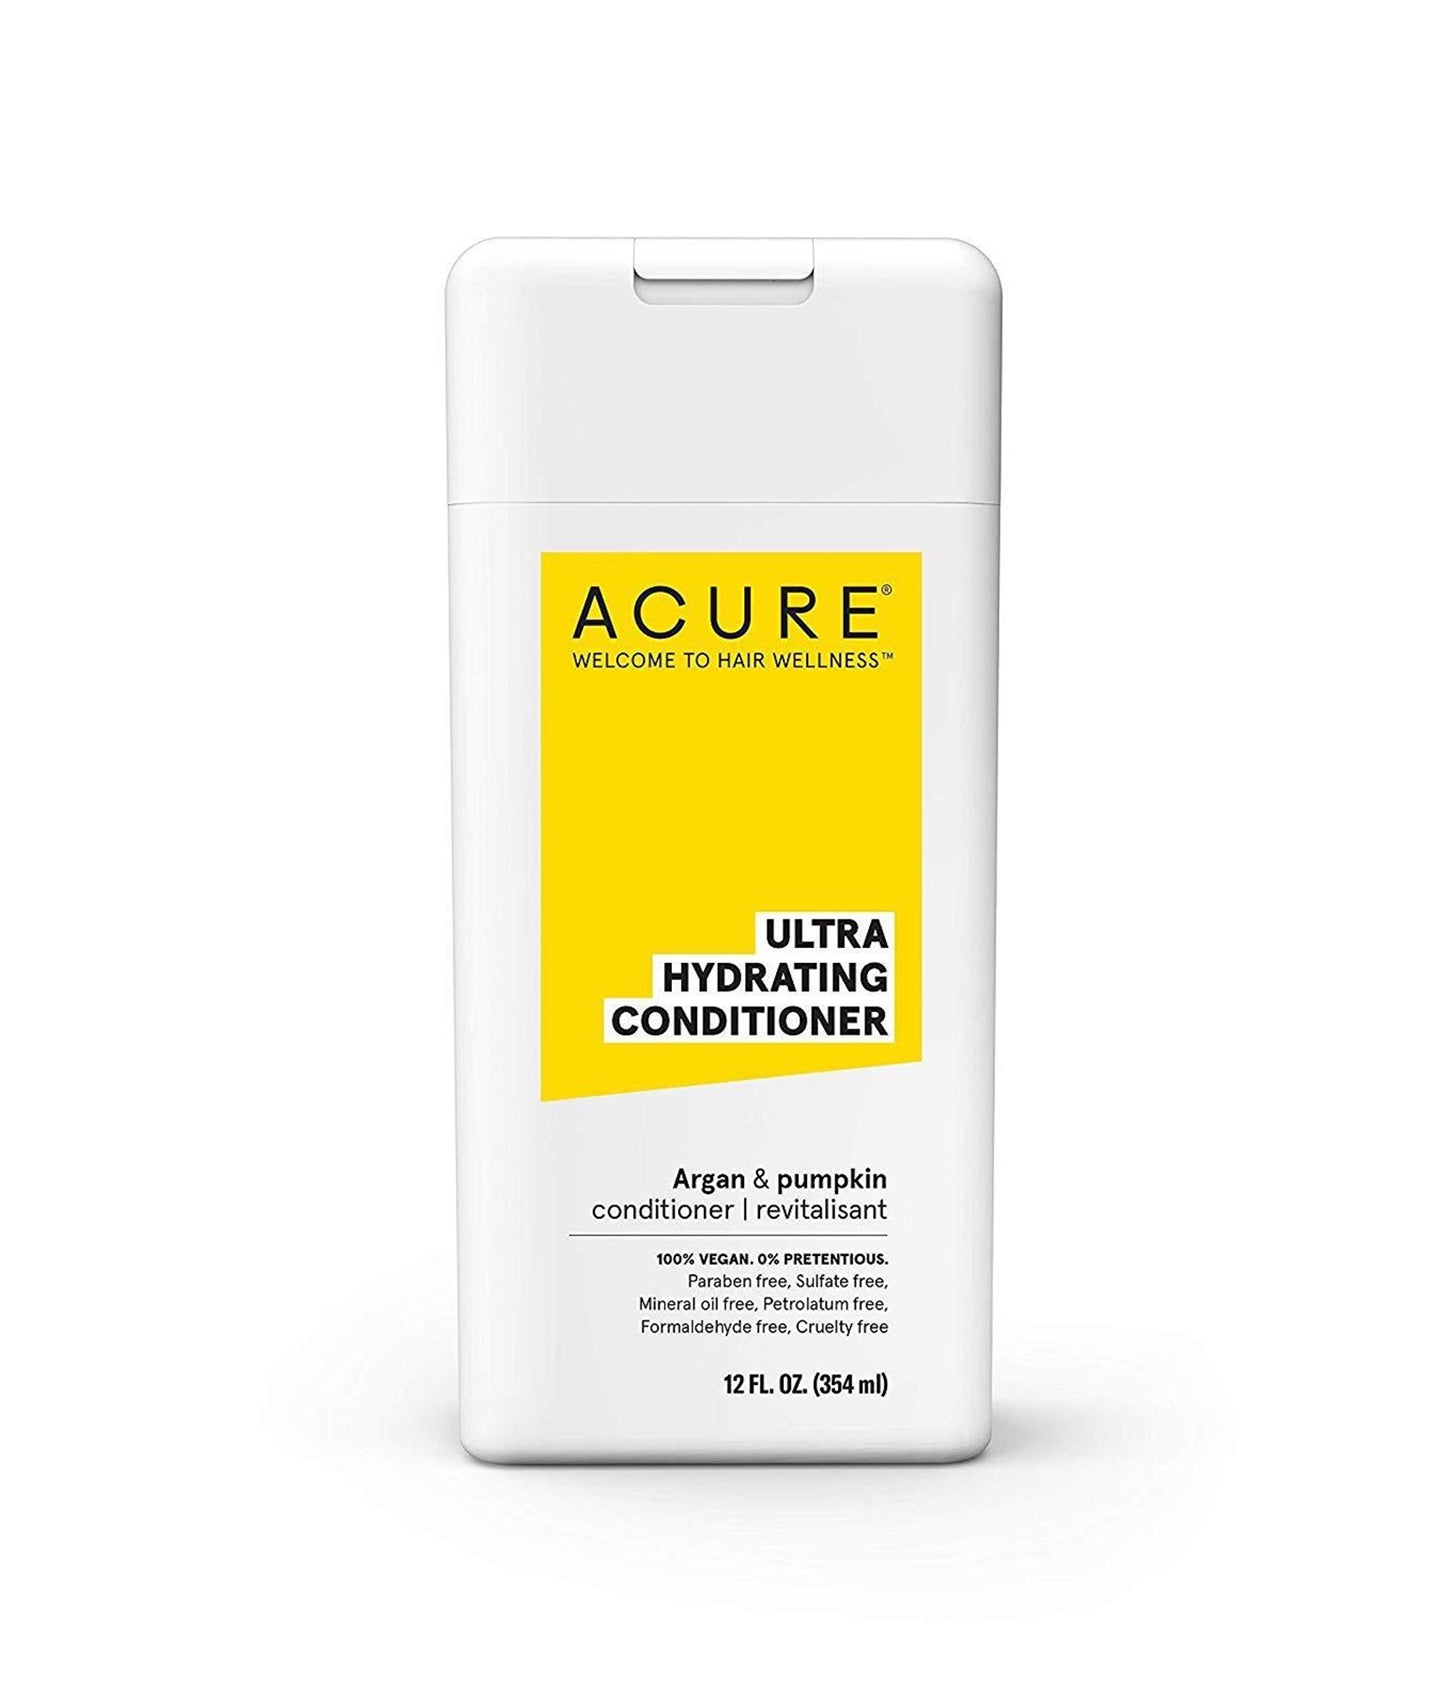 Ultra Hydrating Conditioner